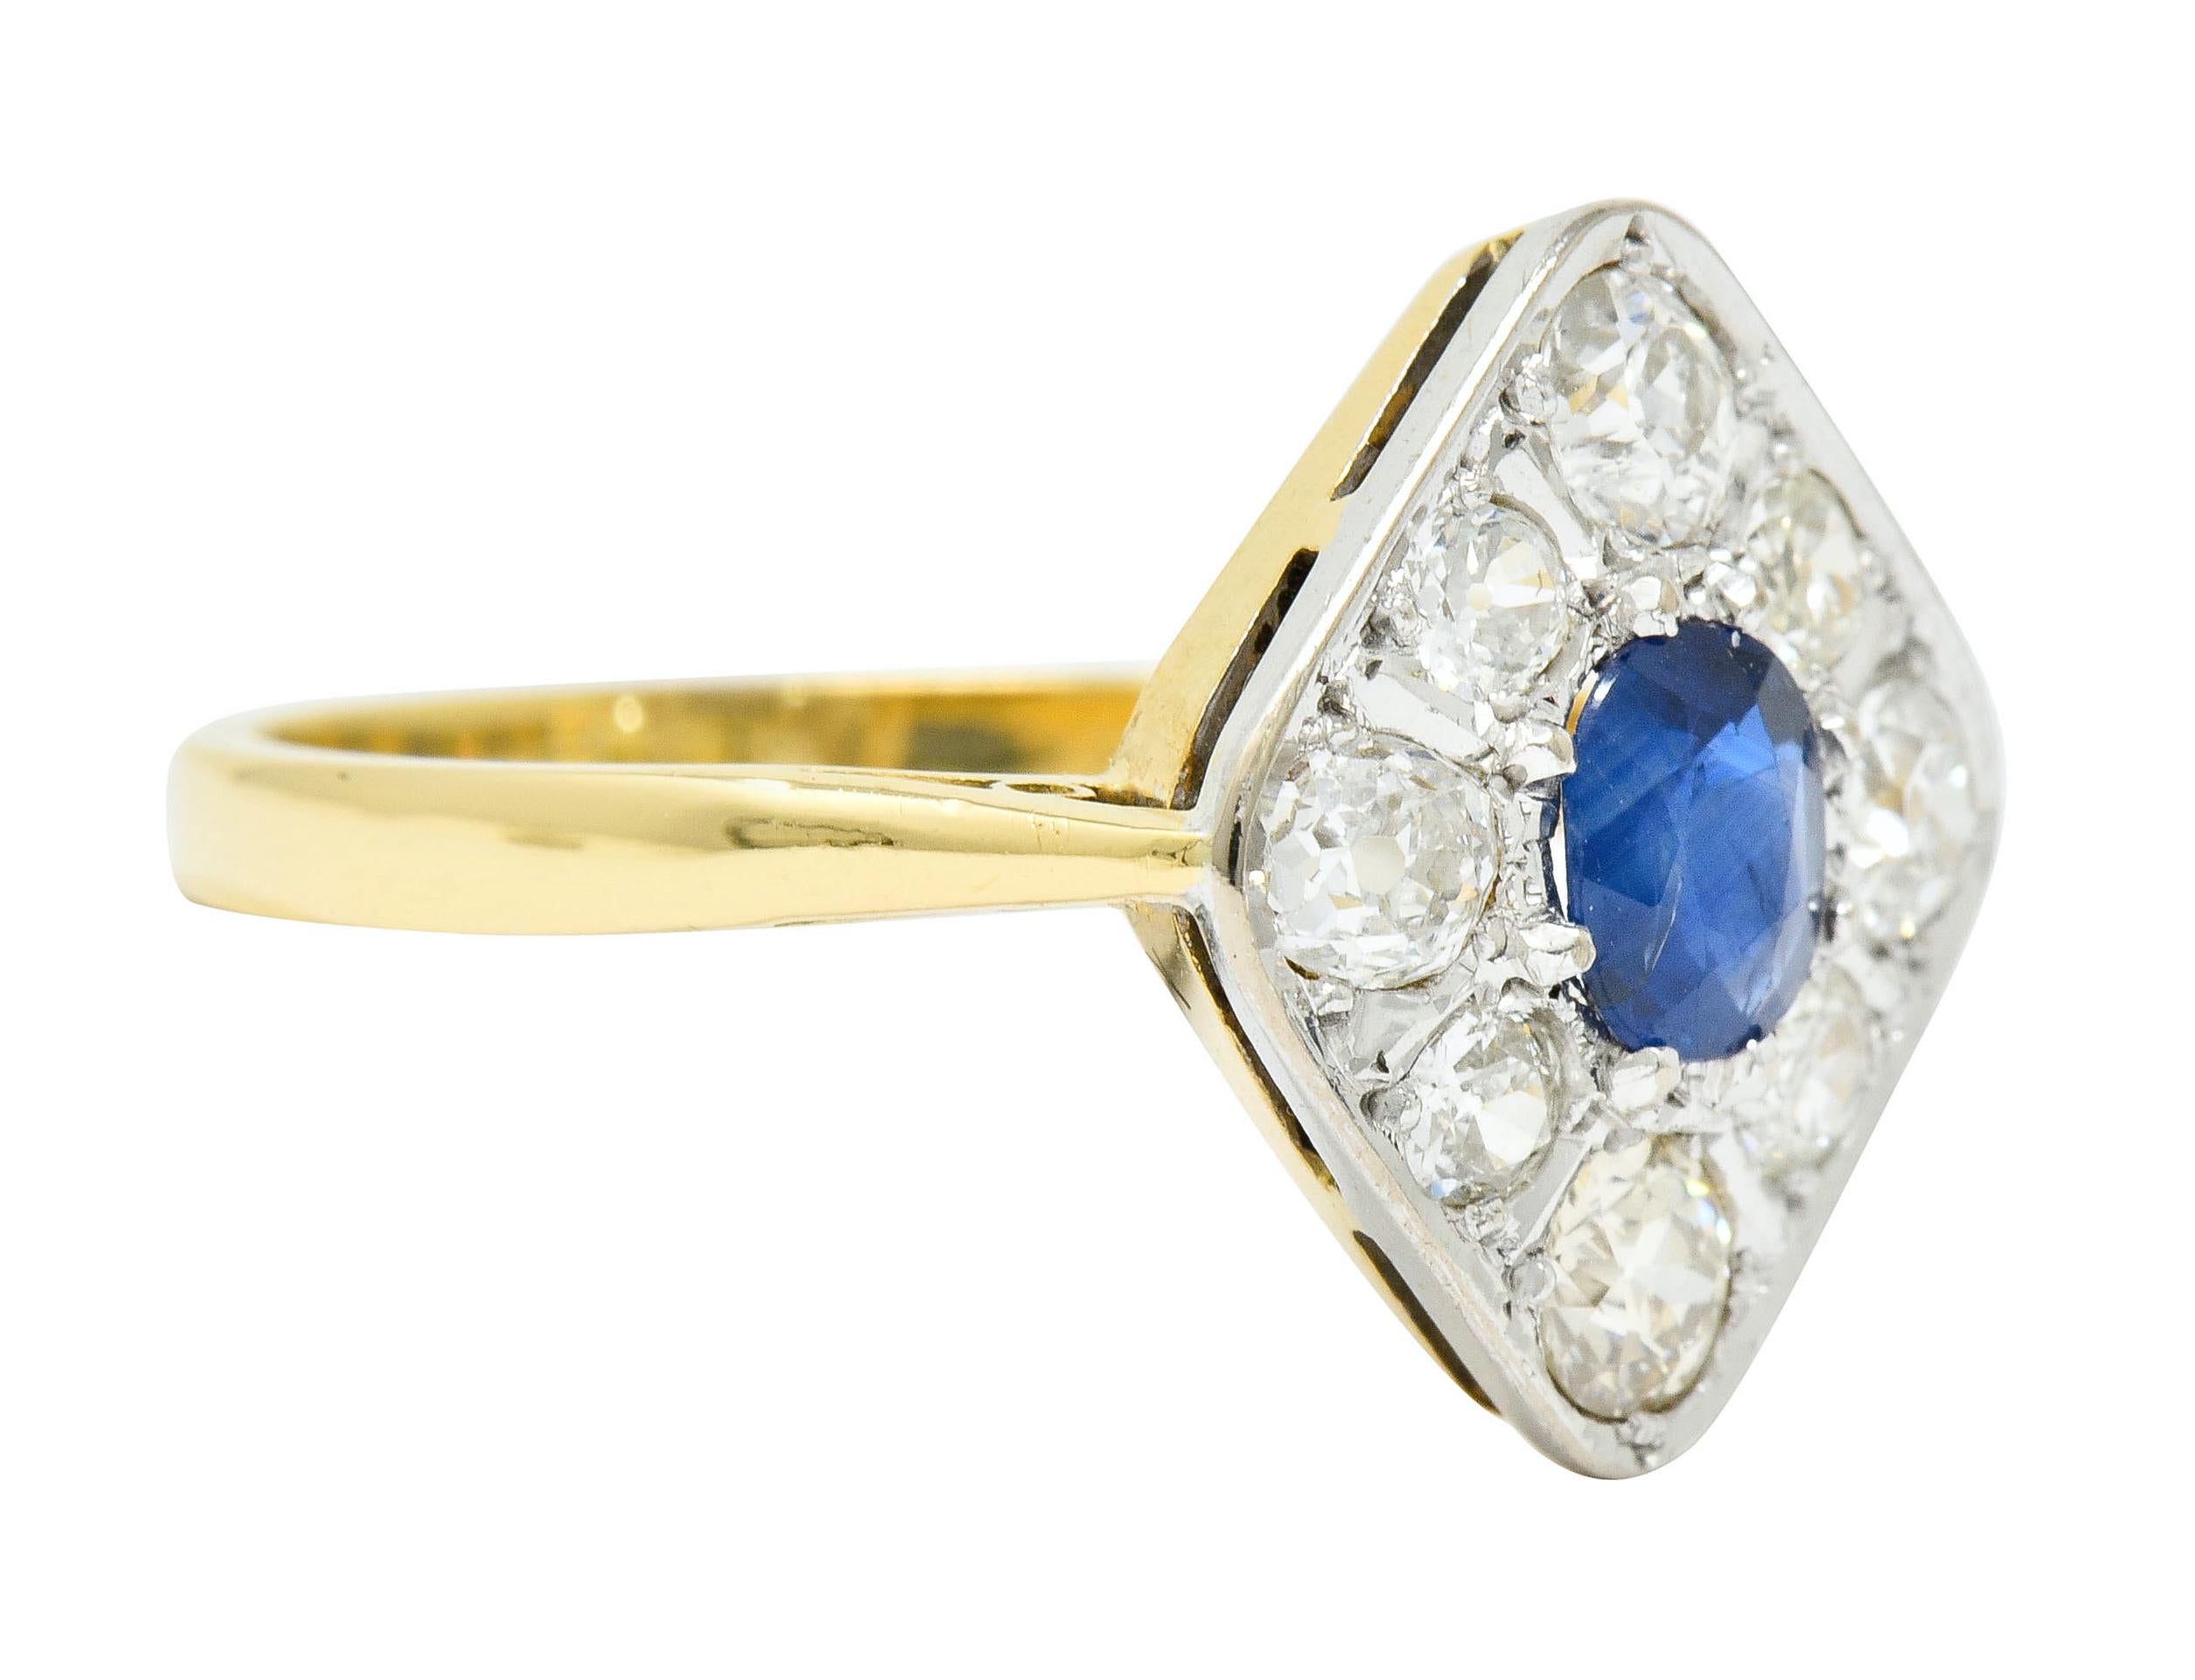 Navette shaped cluster dinner ring centering an oval cushion cut sapphire weighing approximately 0.45 carat, bright Prussian blue in color

Surrounded by old mine and old European cut diamonds weighing approximately 1.32 carats total, G to J color